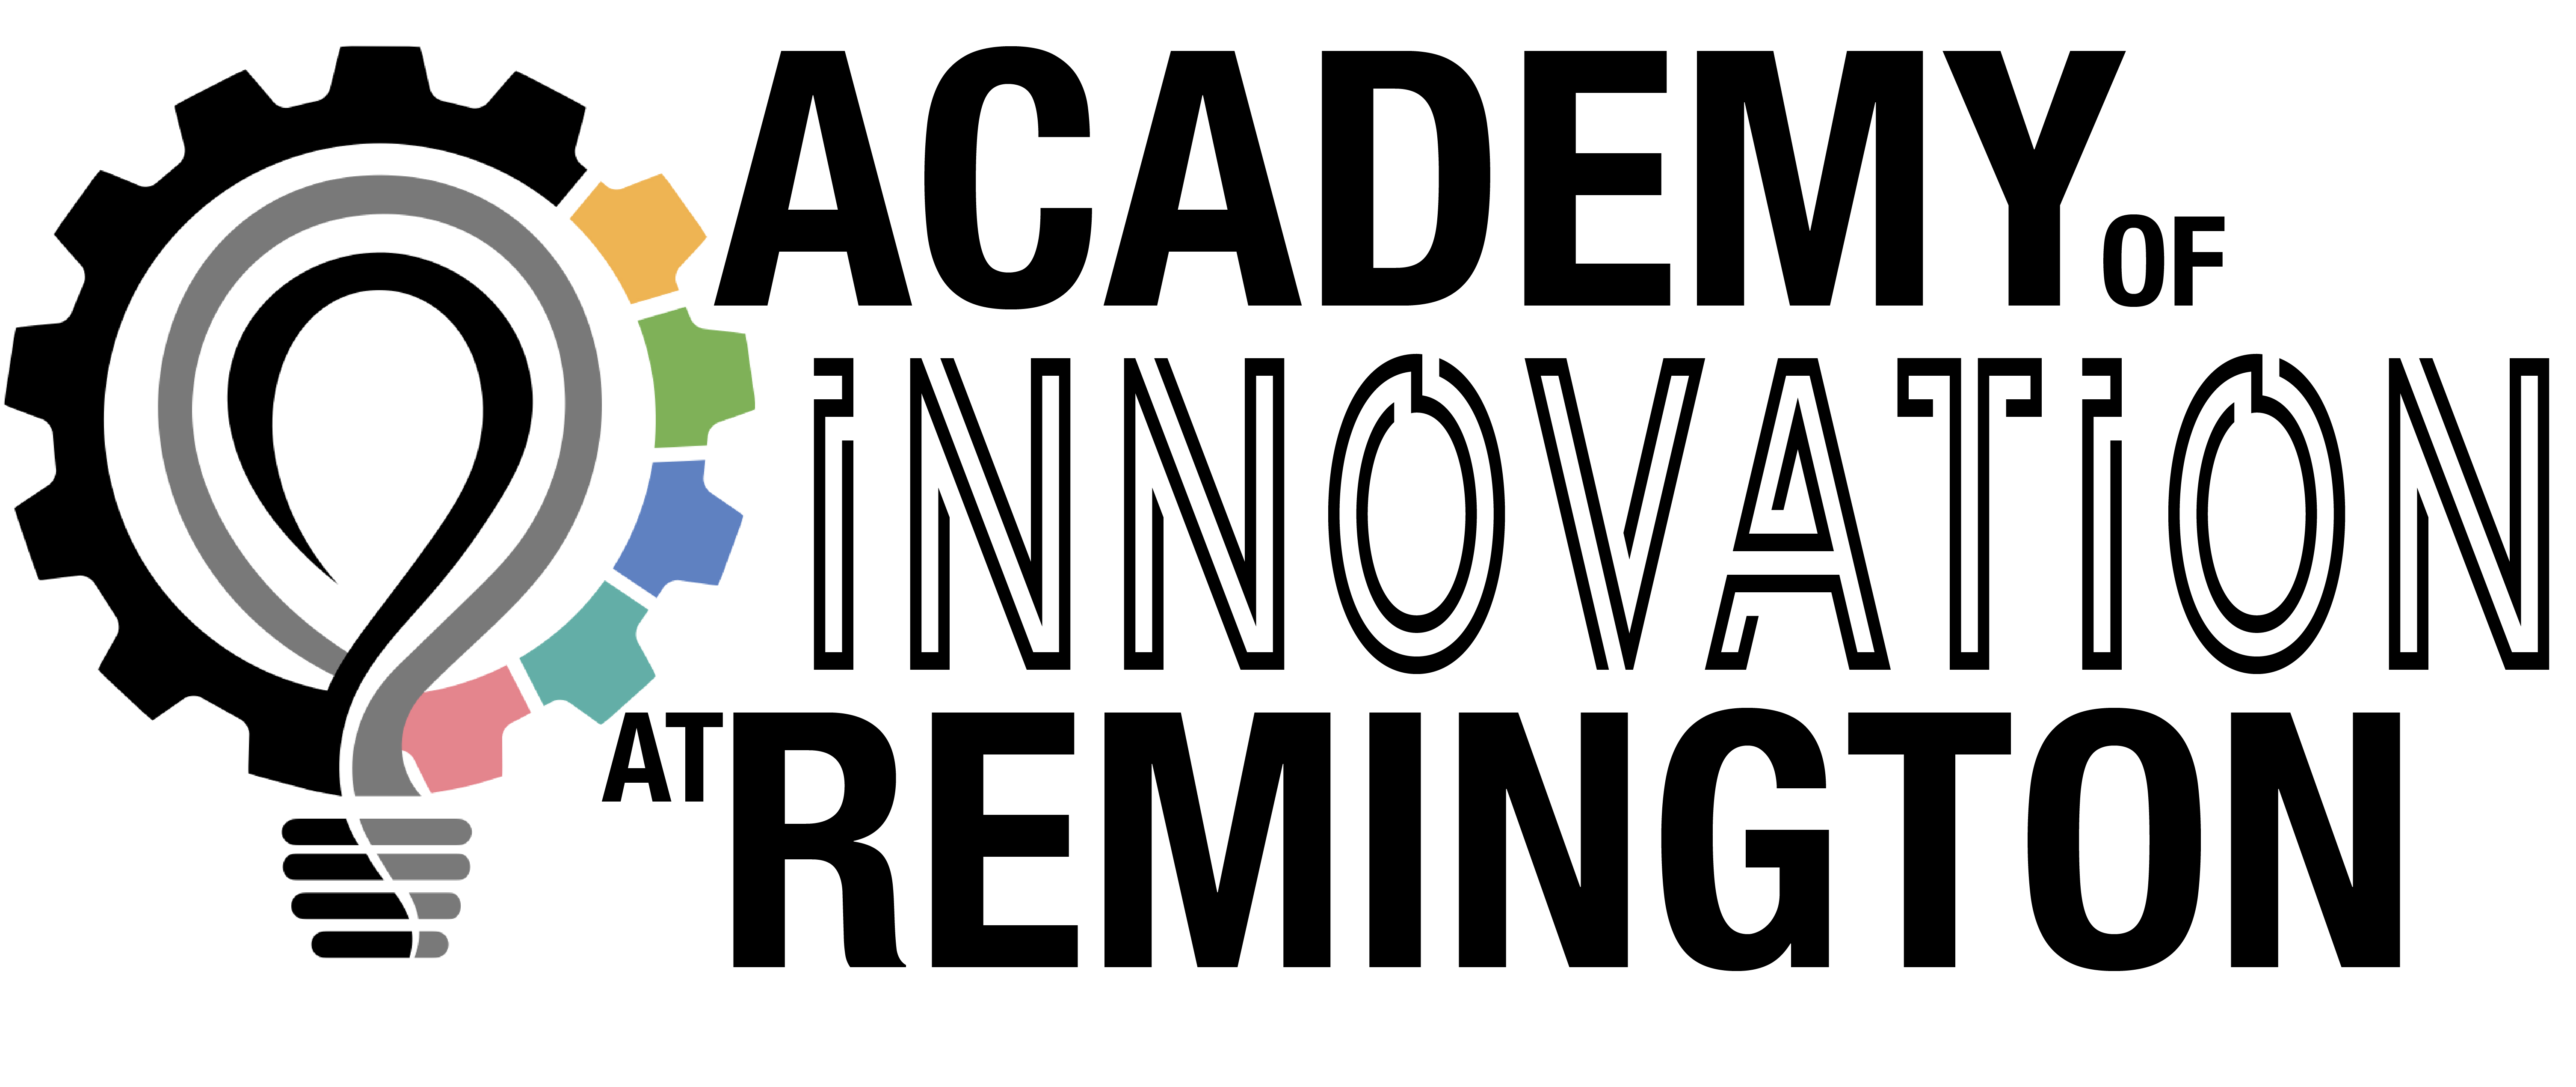 Logo for the Academy of Innovation at Remington which includes a lightbulb and gear